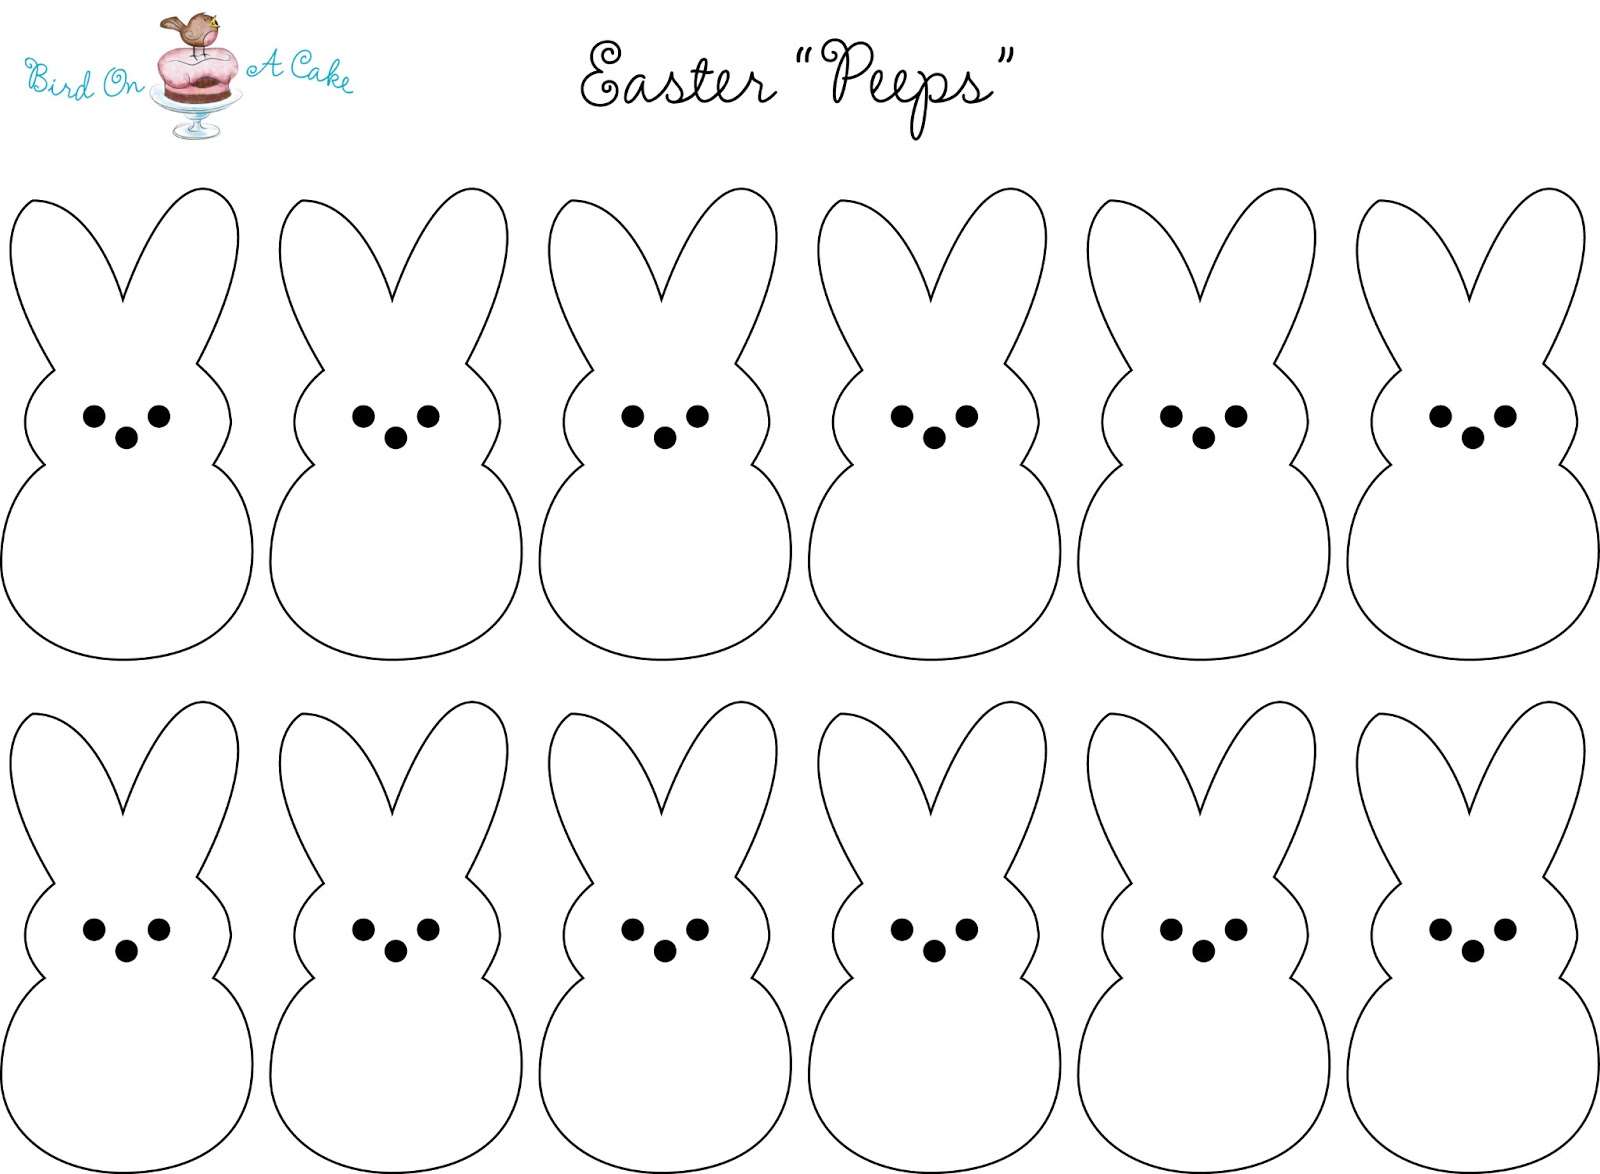 Free printable easter bunny clipart